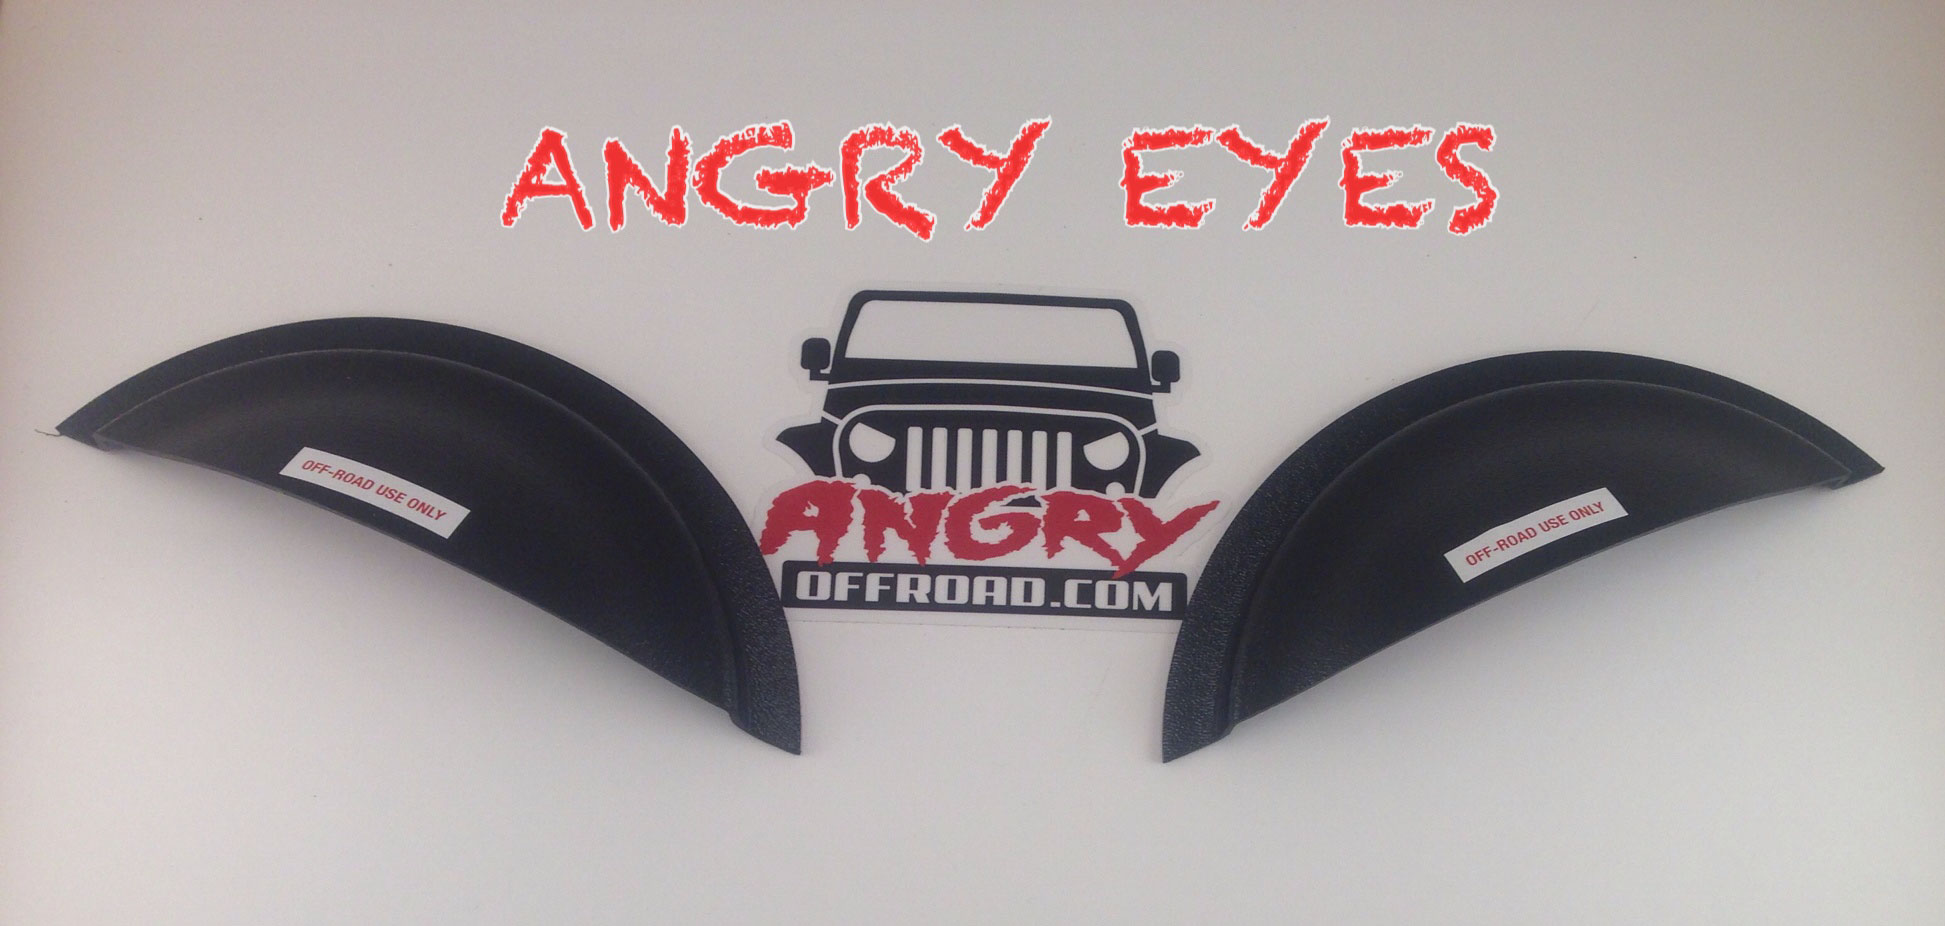 Angry Eyes Jeep Headlight Covers, Angry Eyes, Half Moon Headlight Covers, Jeep Headlight Covers, Jeep Angry Eyes Headlight Covers